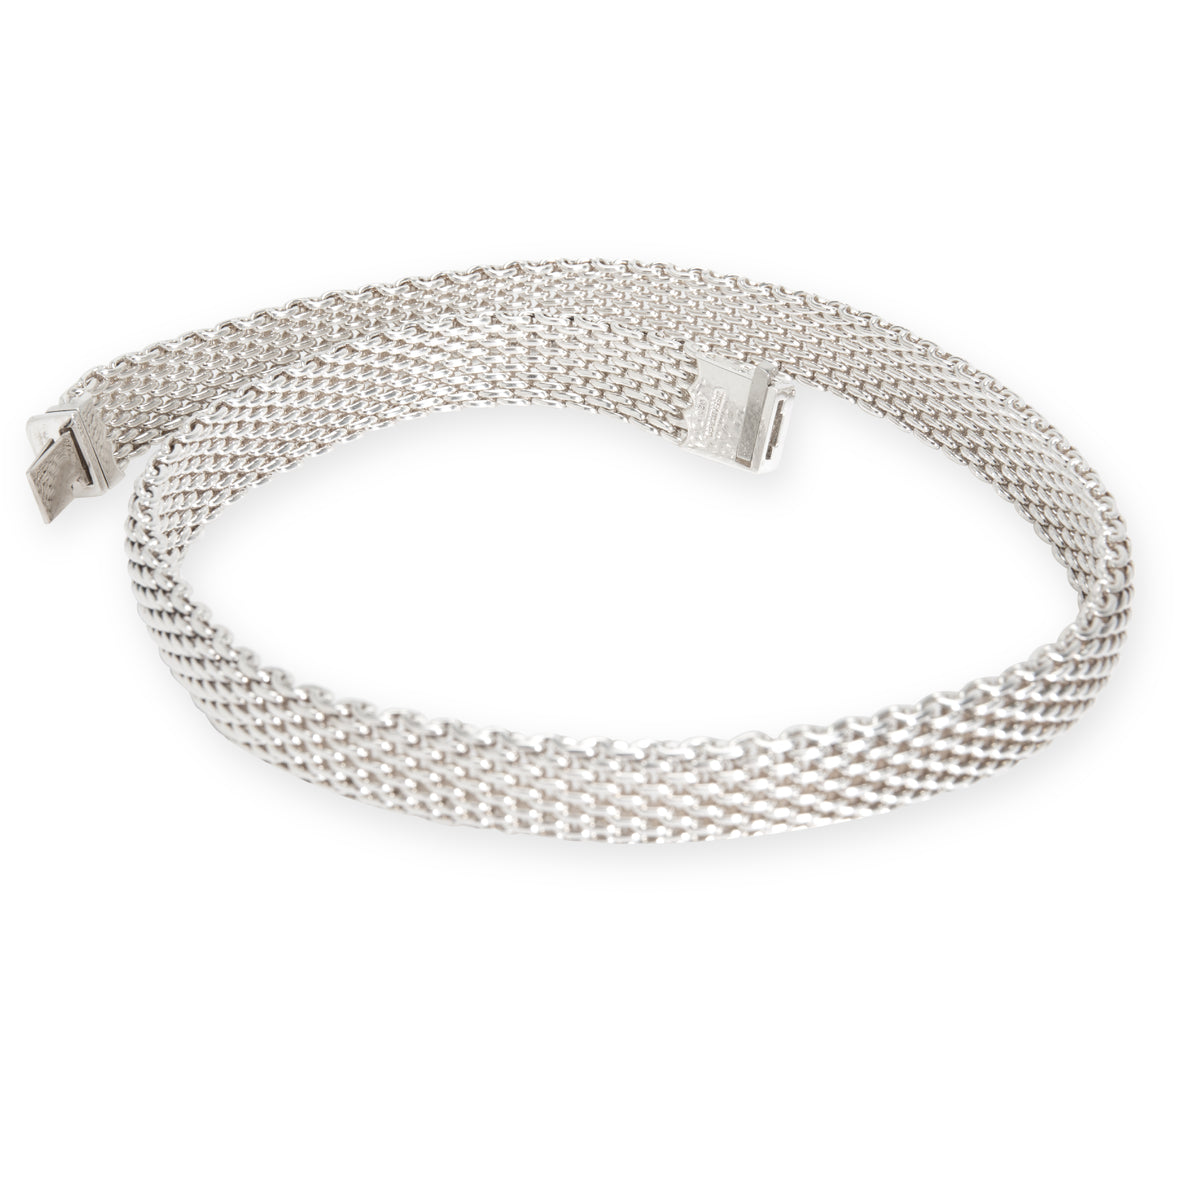 Tiffany & Co. Somerset Mesh Necklace in Sterling Silver